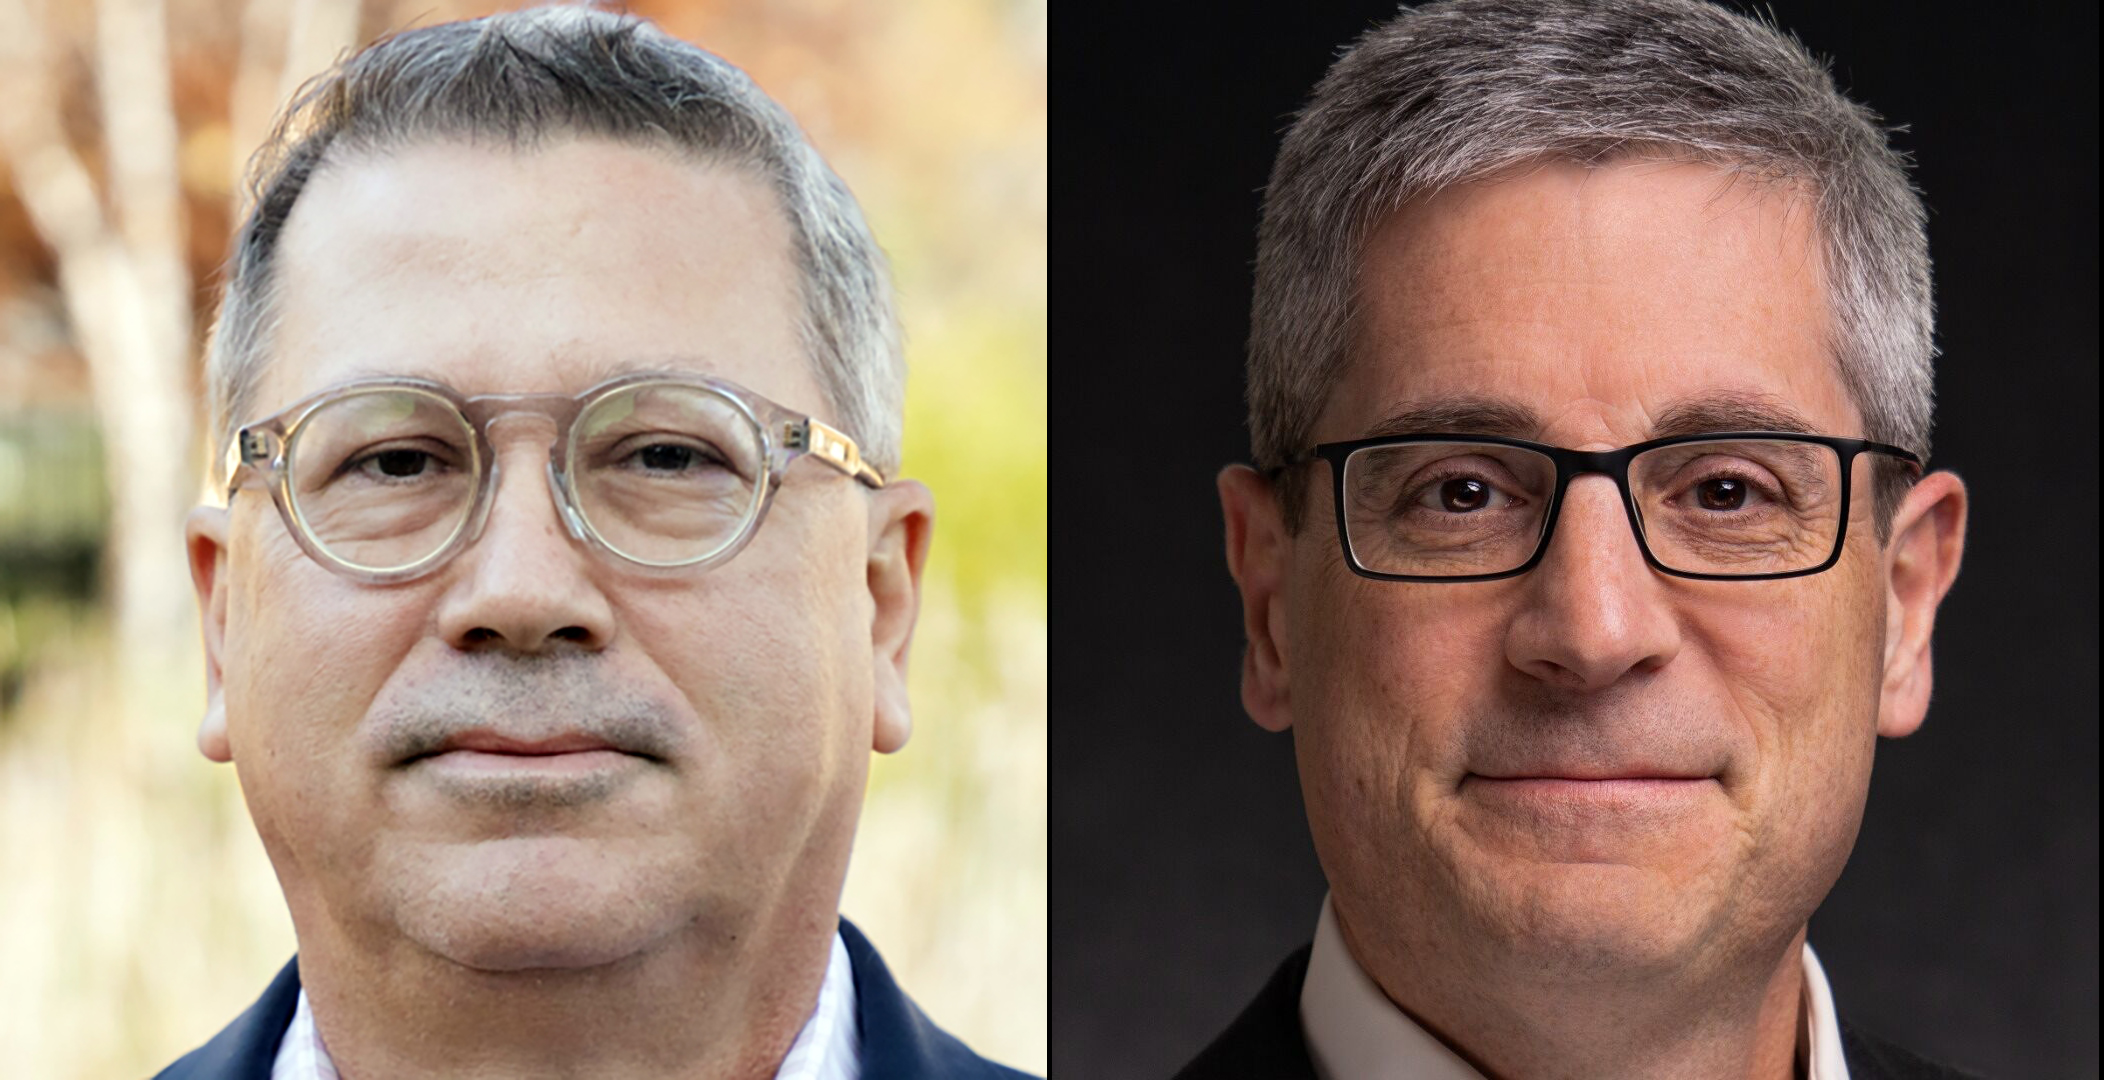 Side by side photos of two men, both of whom have short hair and glasses